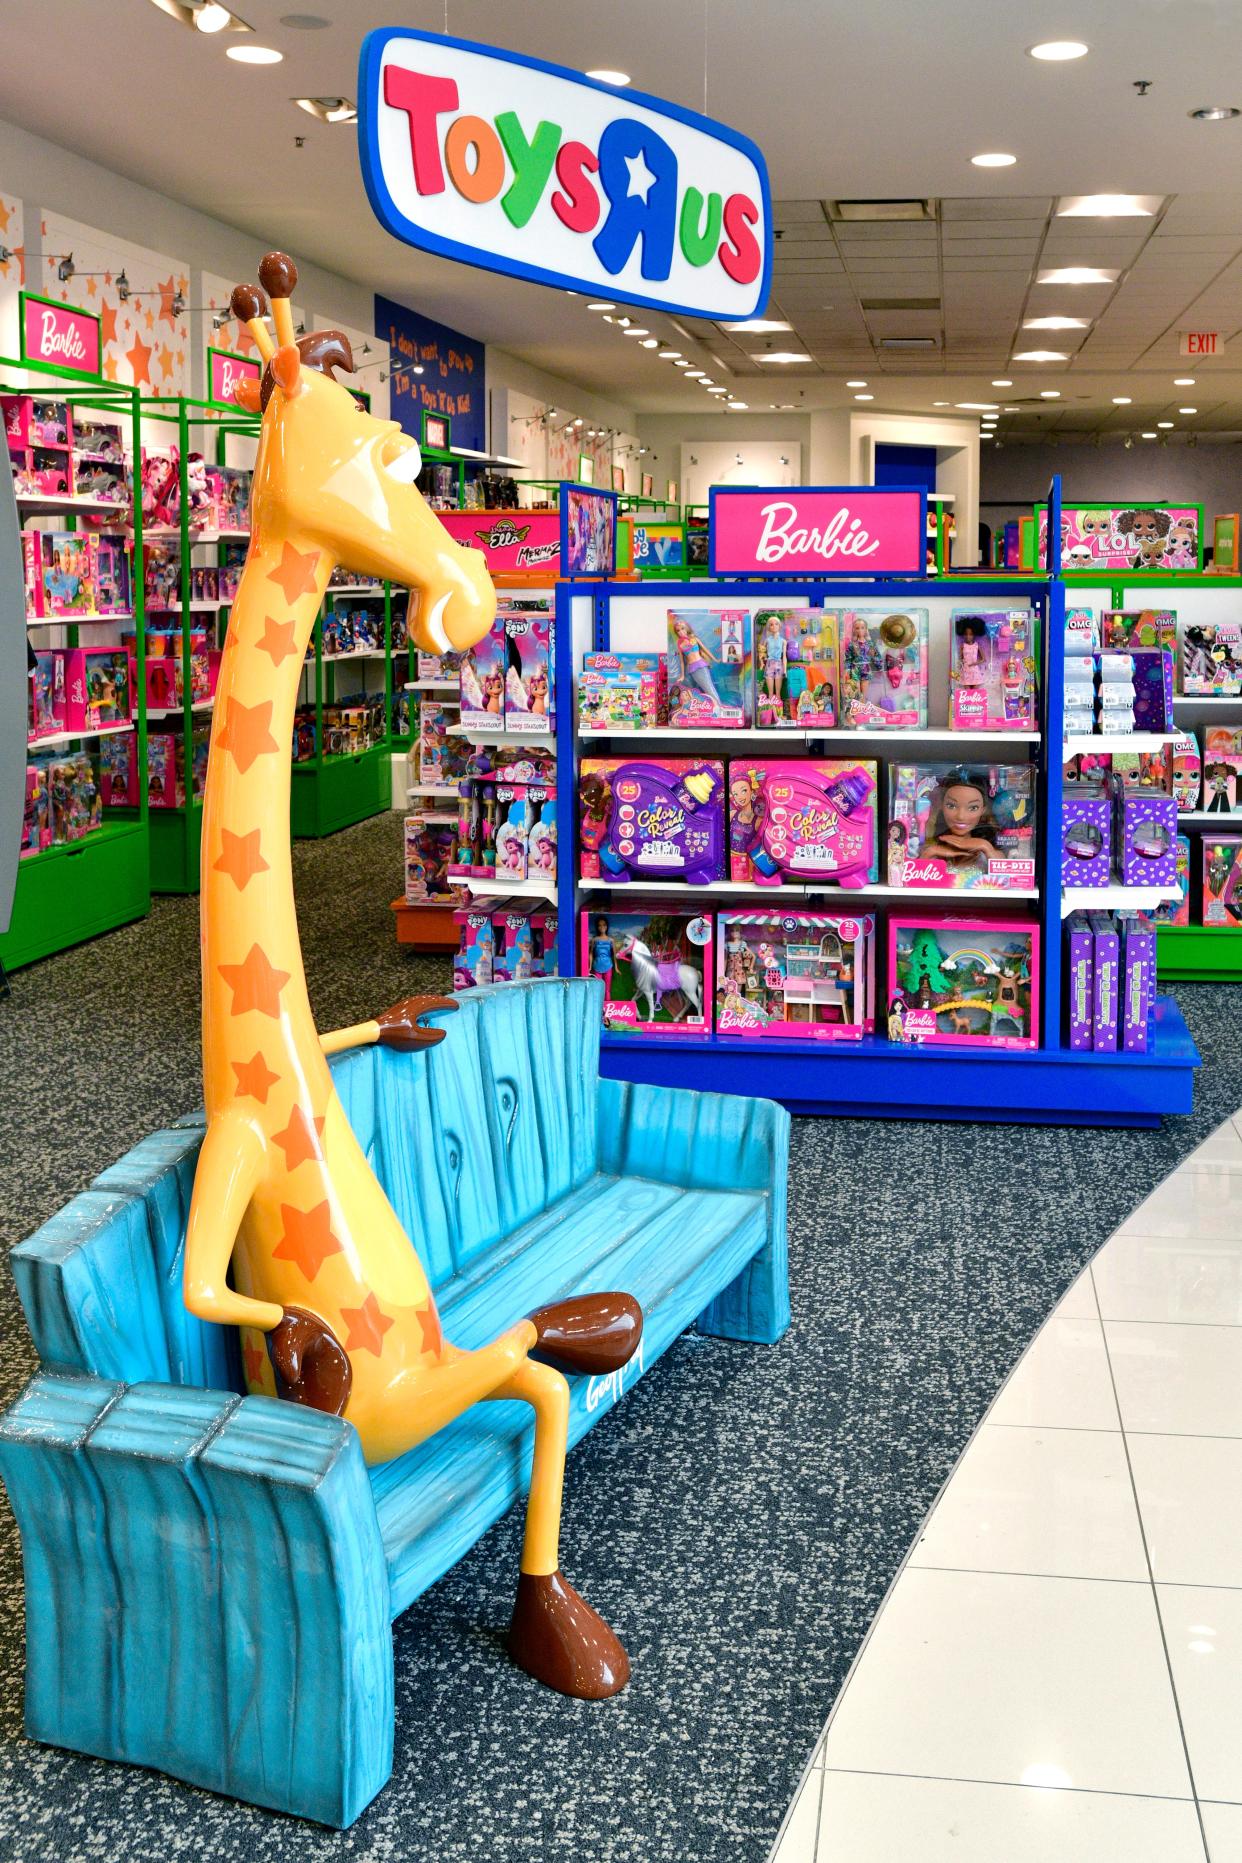 A view of Macy's Toys  R  Us in Jersey City, New Jersey. The toy store is expected to open in Macy's stores across the nation, including in the Summit Mall store. The stores will include benches such as this, with the toy store's mascot Geoffrey, for photo opportunities.